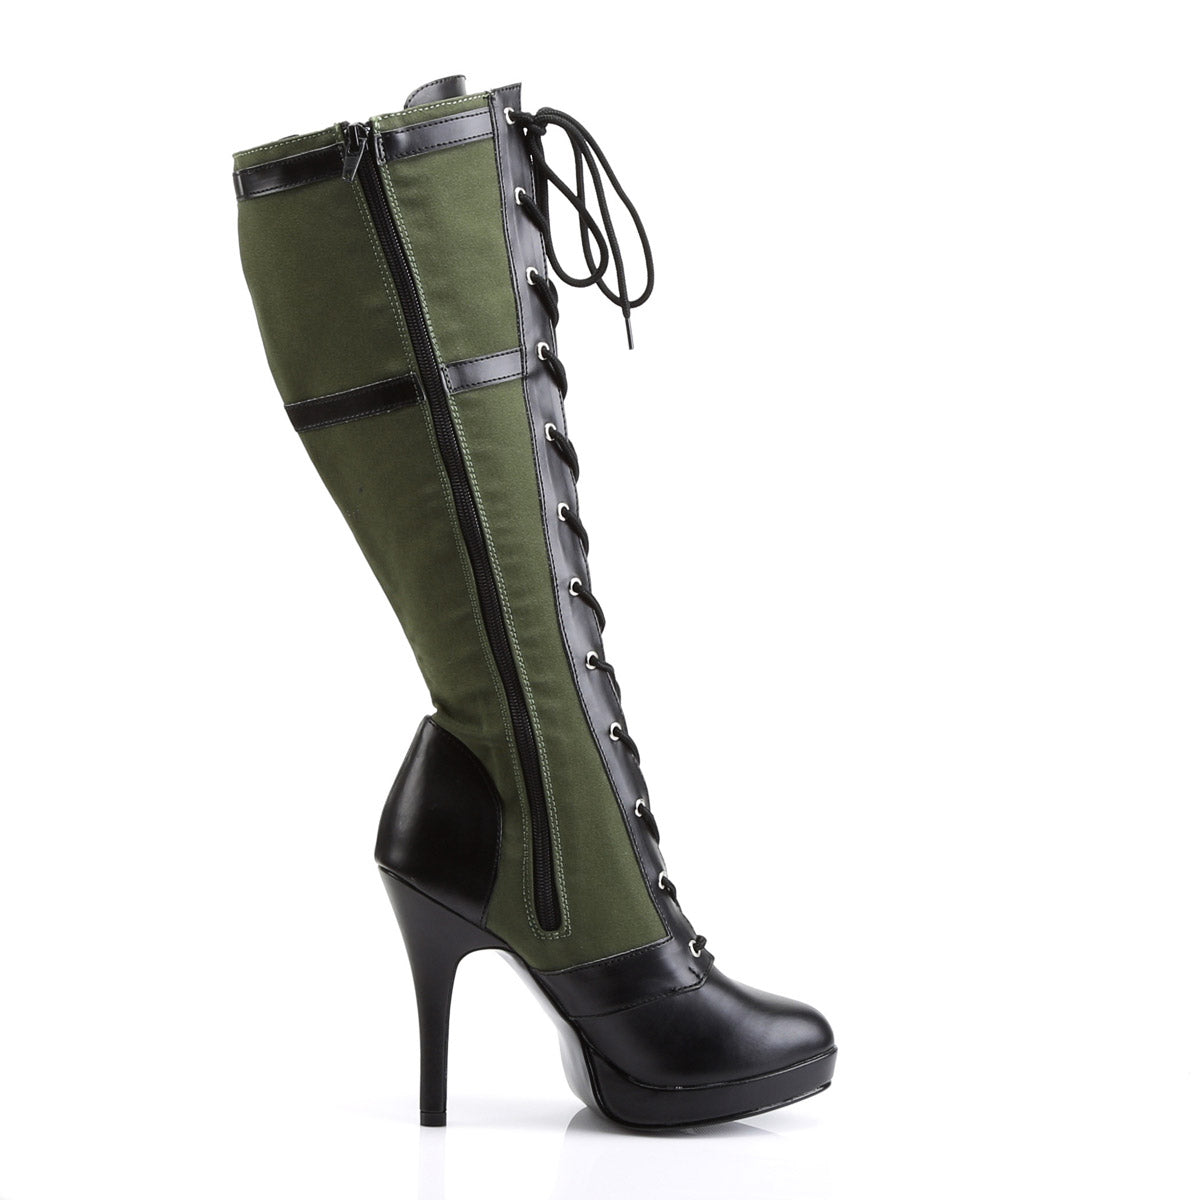 Sexy Army Star Lace Up Stiletto Platform Knee High Heels Boots Shoes Pleaser Funtasma ARENA/2022